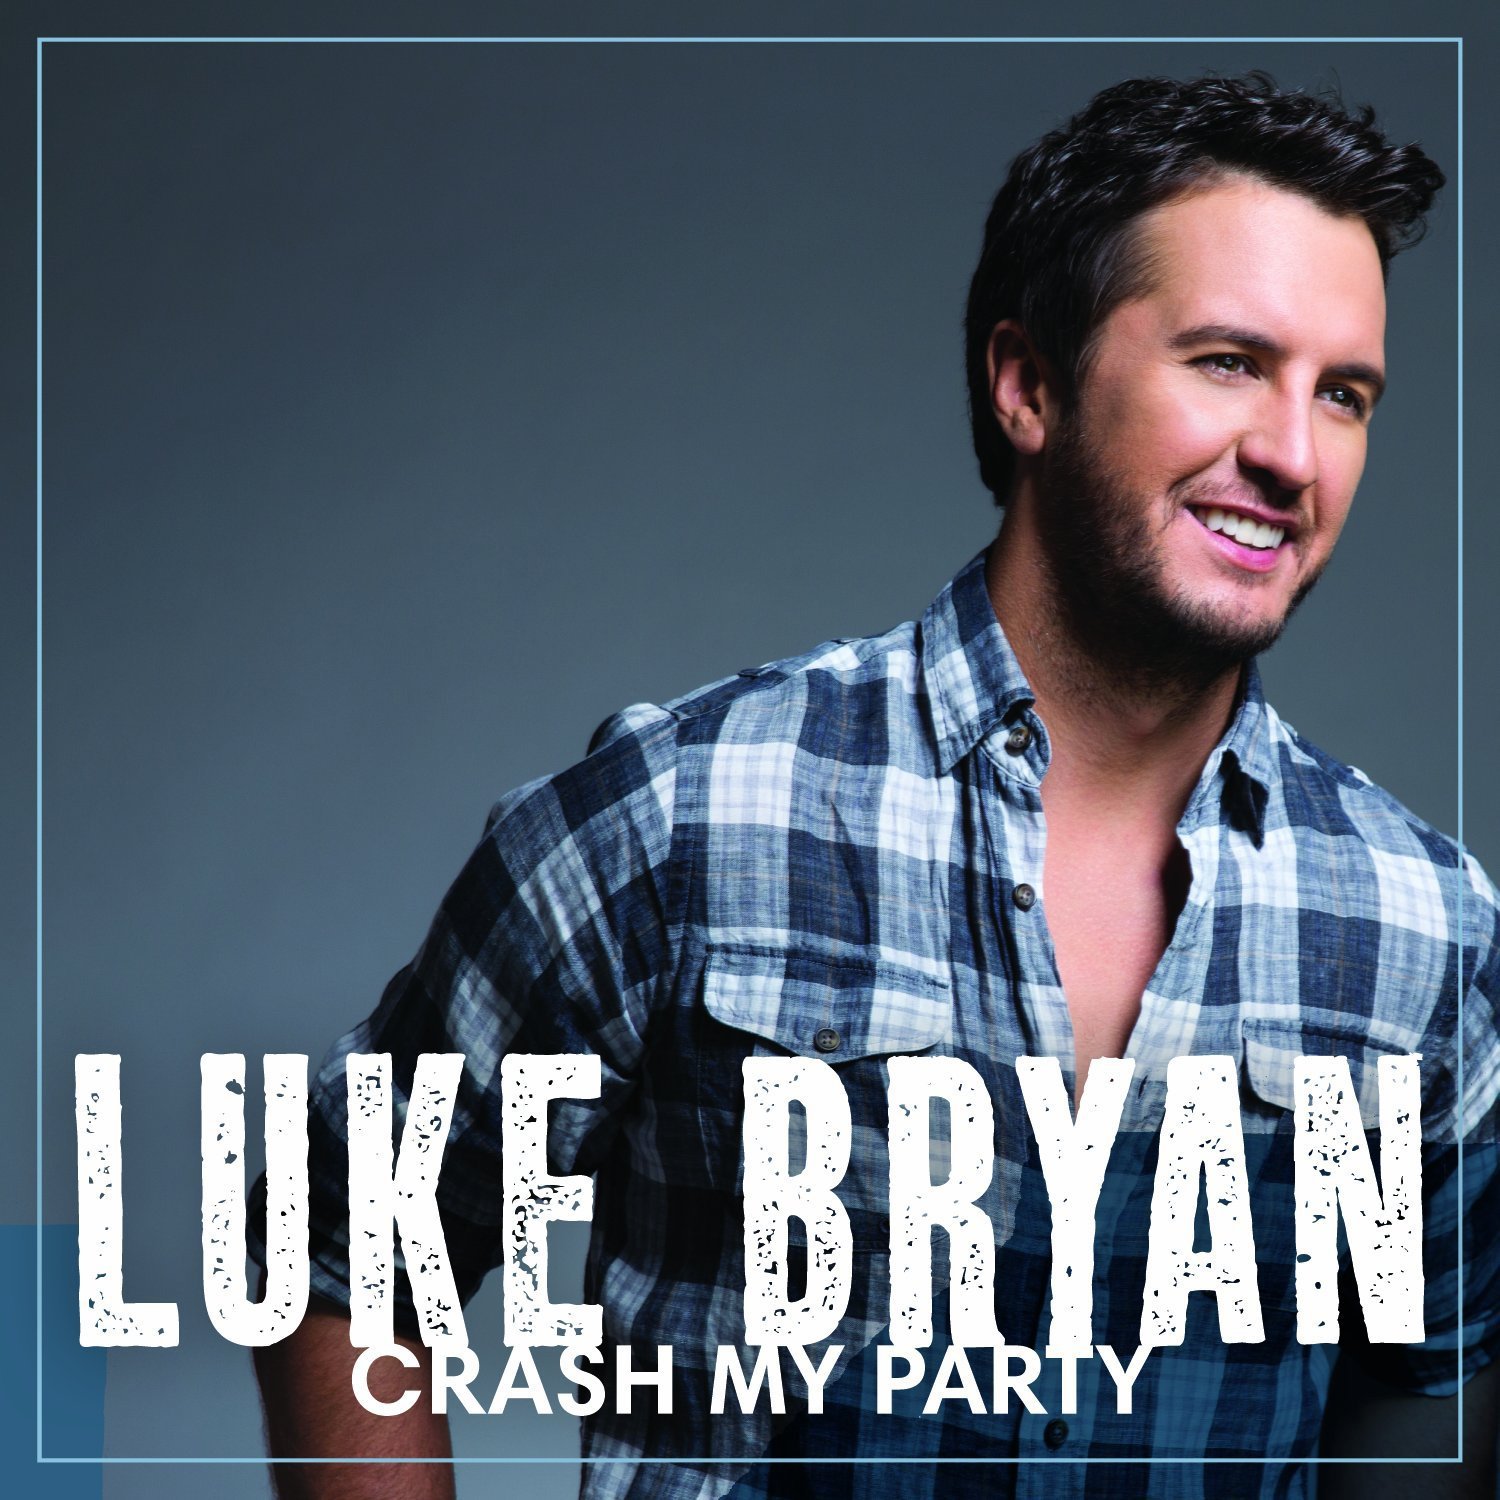 Art for That's My Kind of Night by Luke Bryan